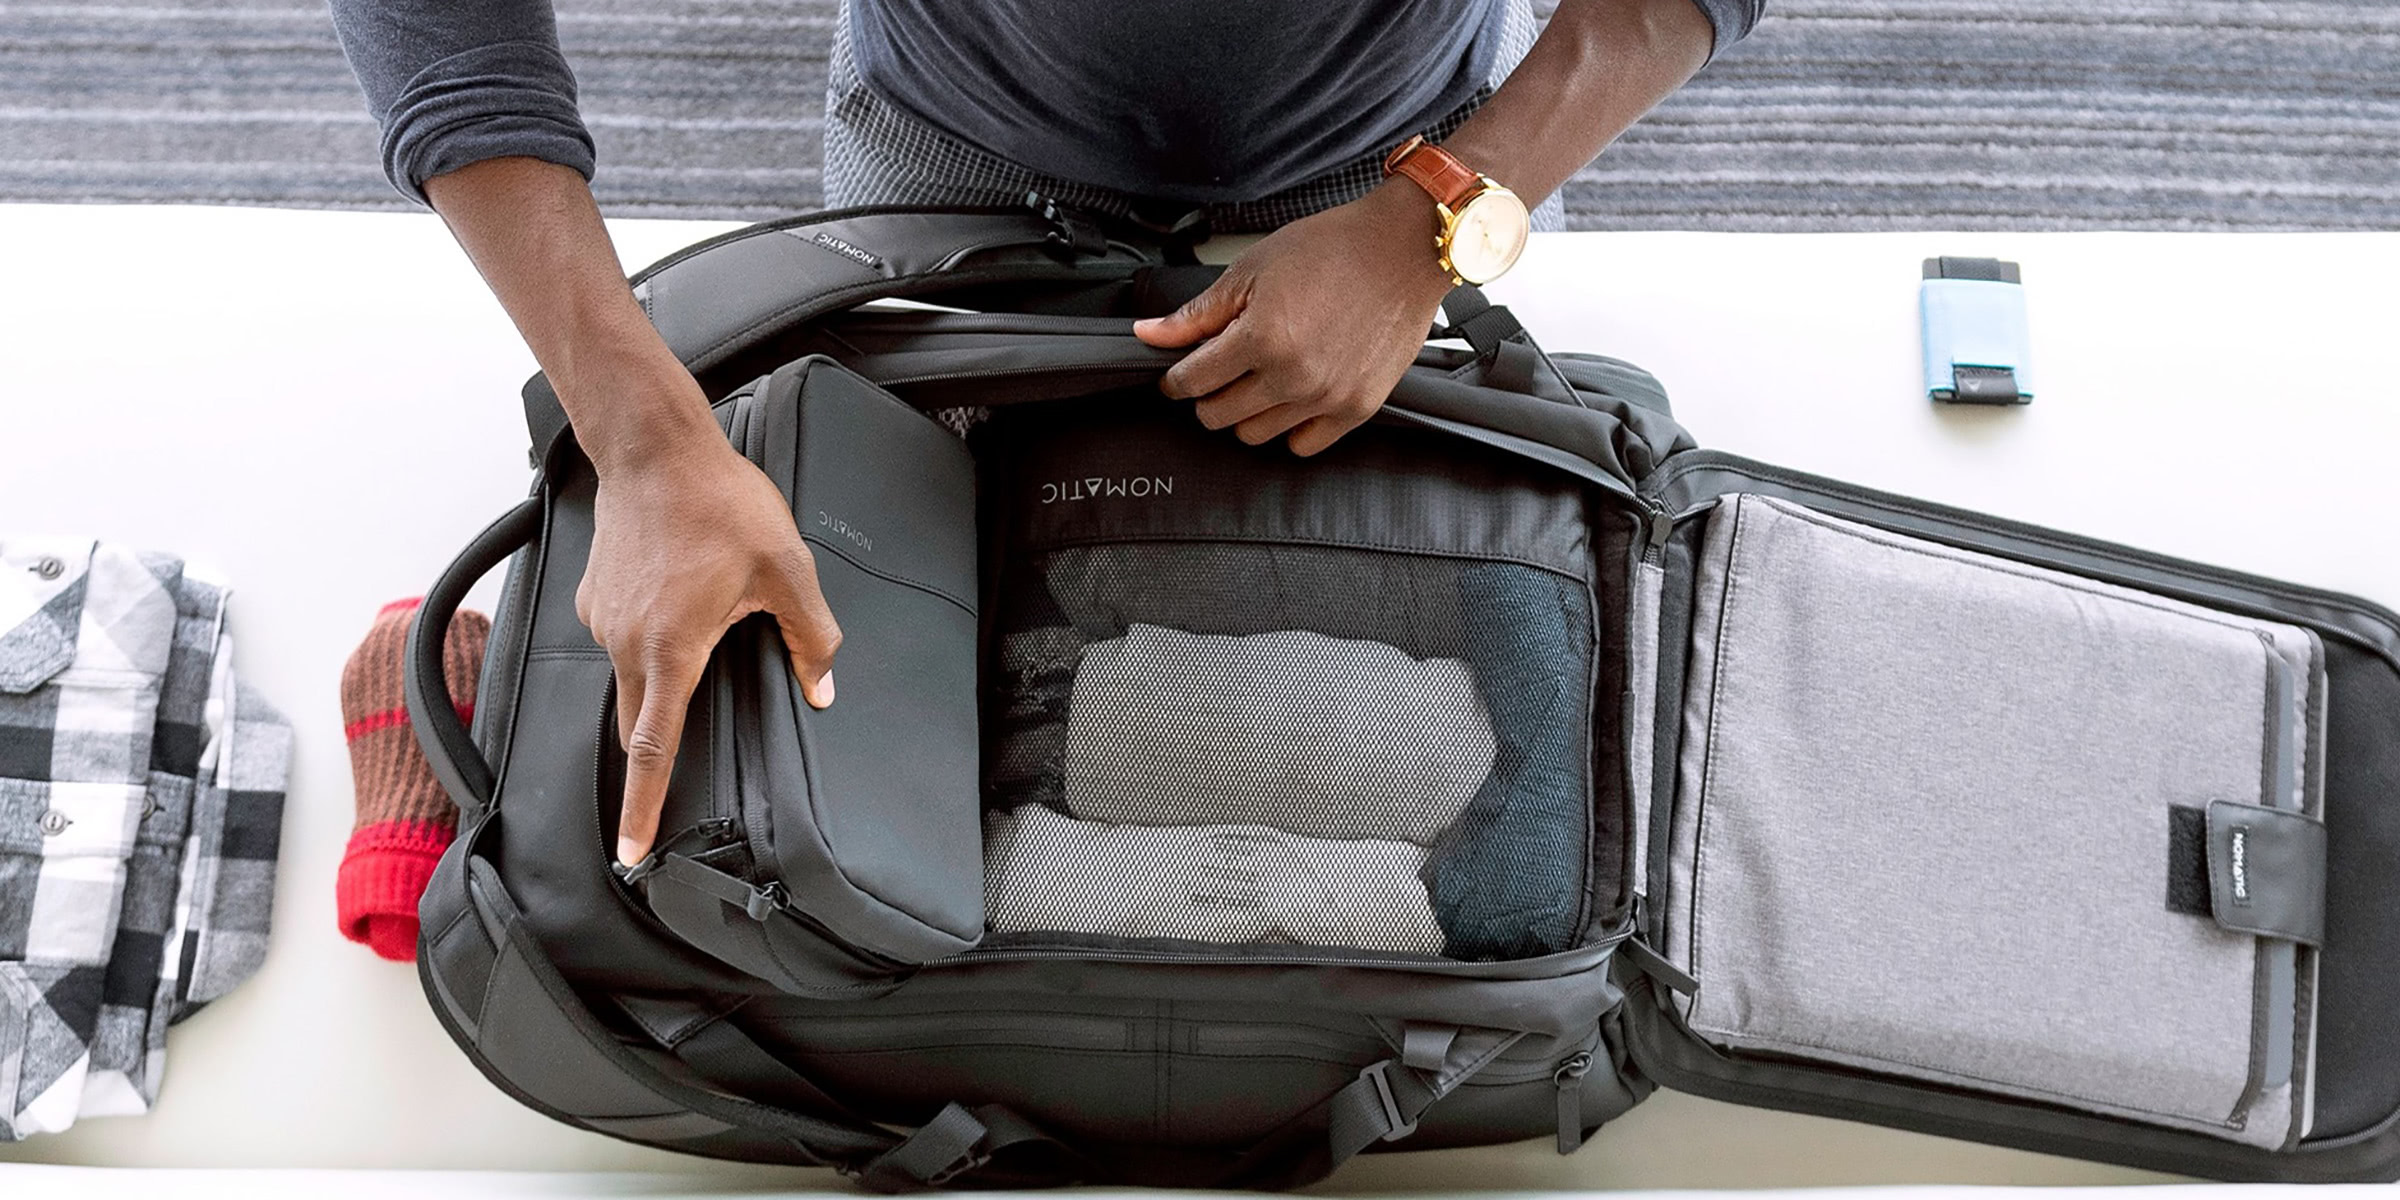 packing-cubes:-the-travel-accessory-to-pack-like-a-pro